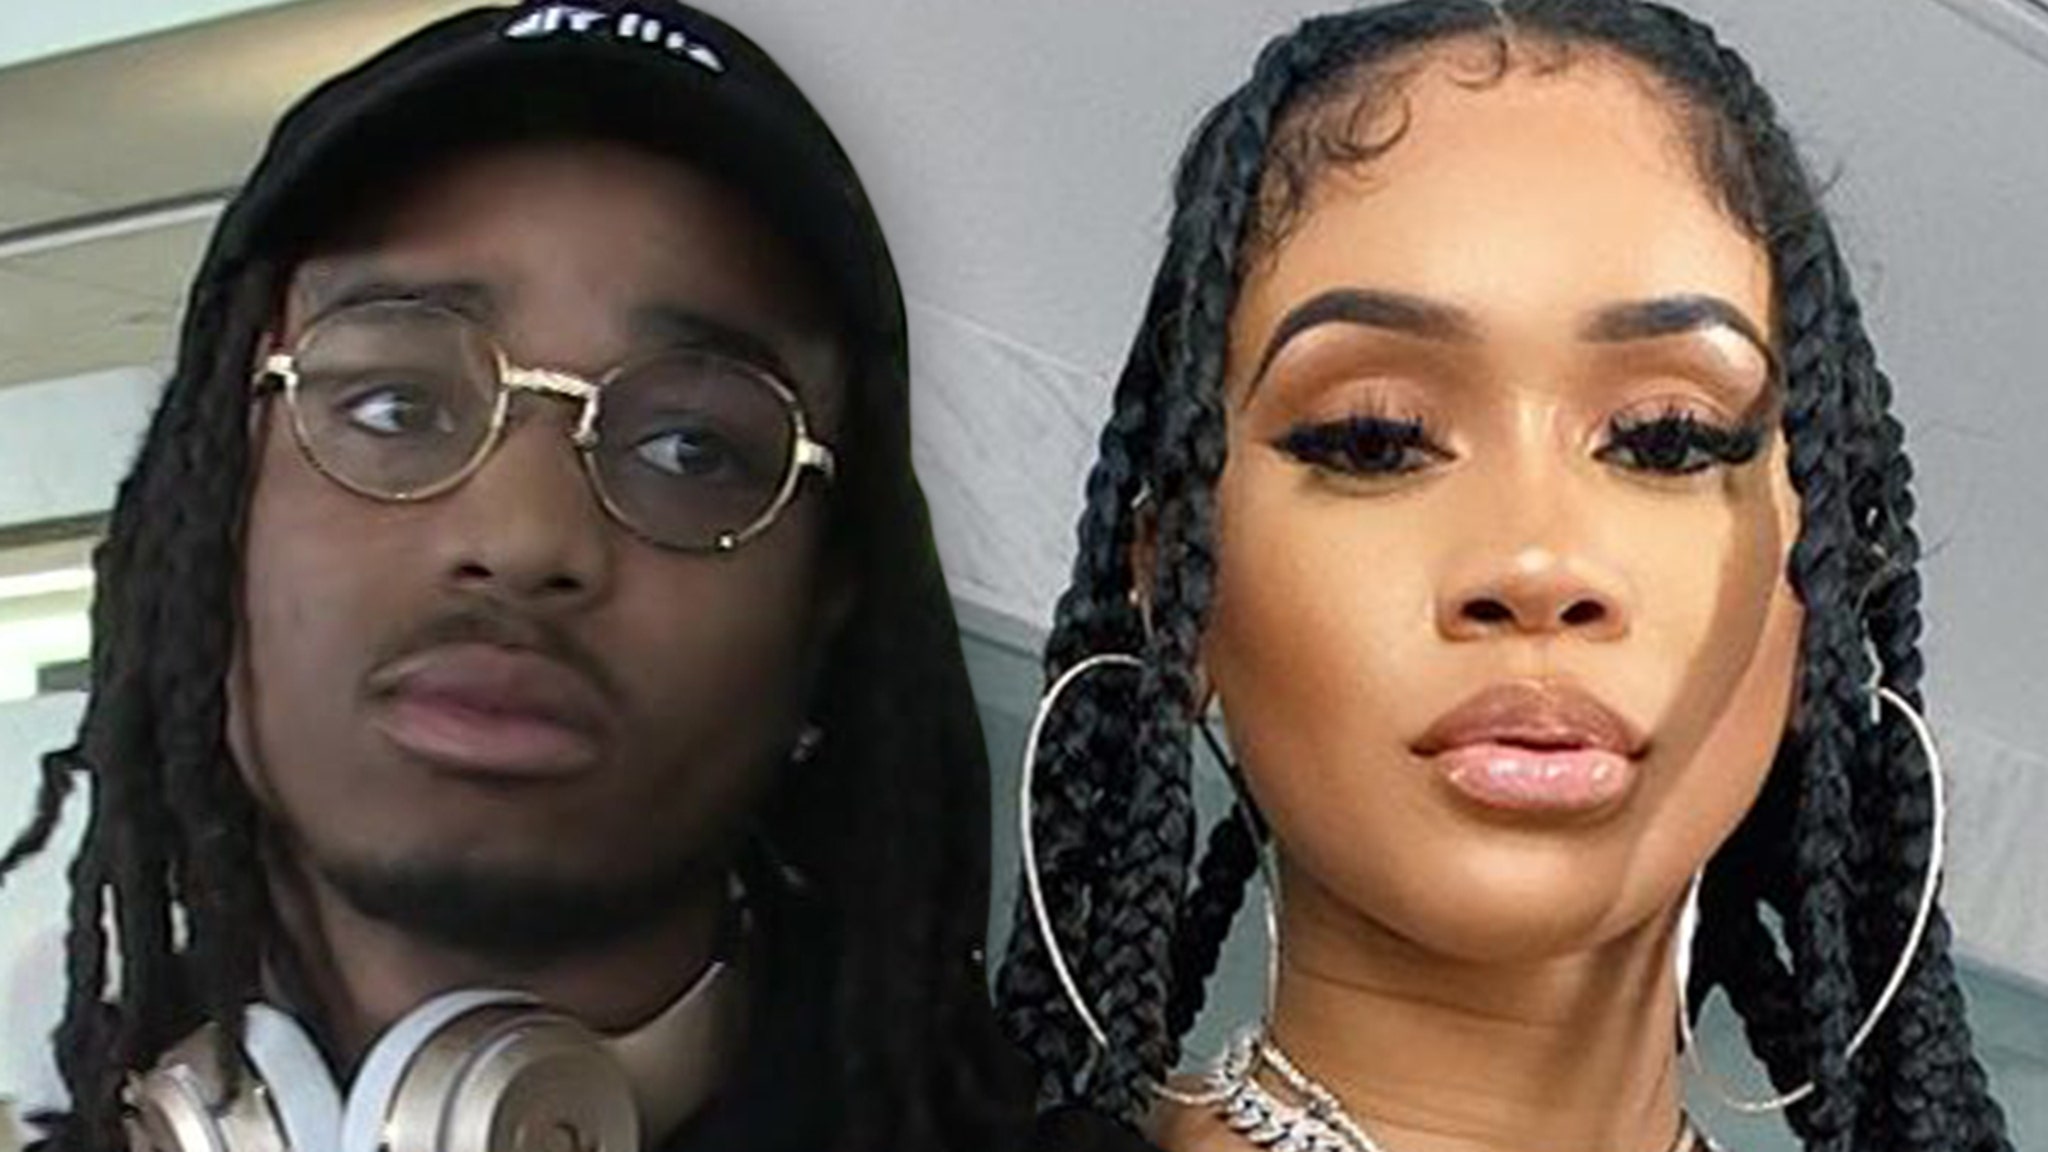 Quavo & Saweetie Avoid Criminal Charges for Elevator Fight - TMZ